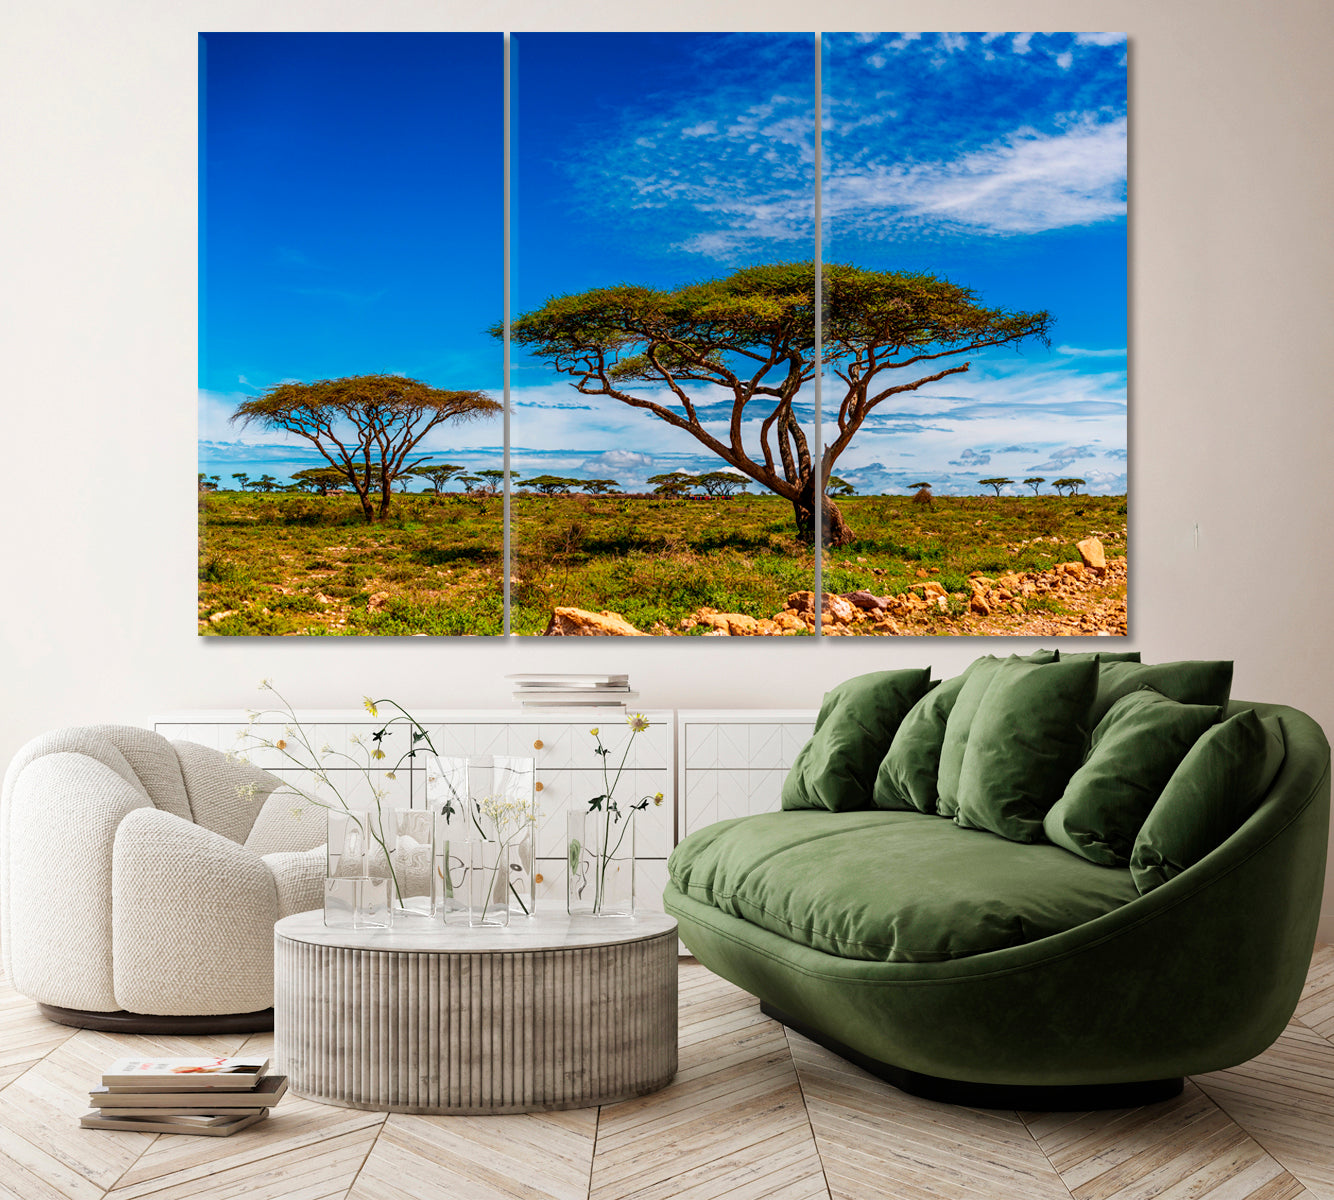 Ngorongoro Conservation Area. African Landscape Canvas Print ArtLexy 3 Panels 36"x24" inches 